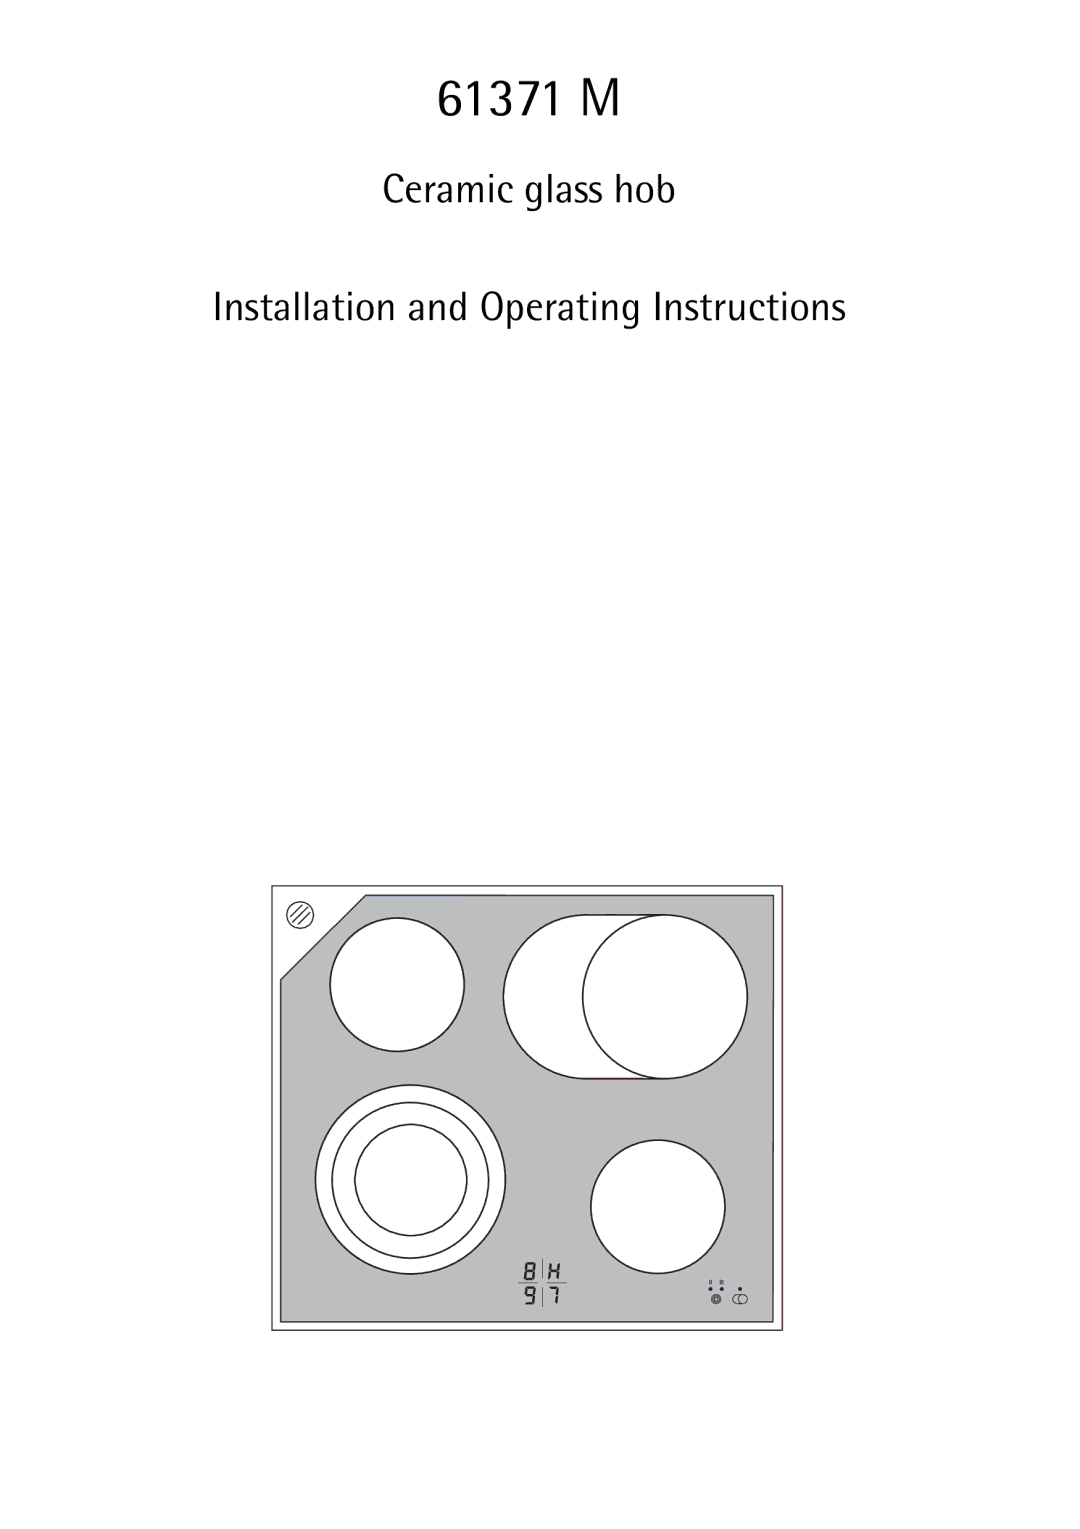 Electrolux 6204 operating instructions 61371 M 